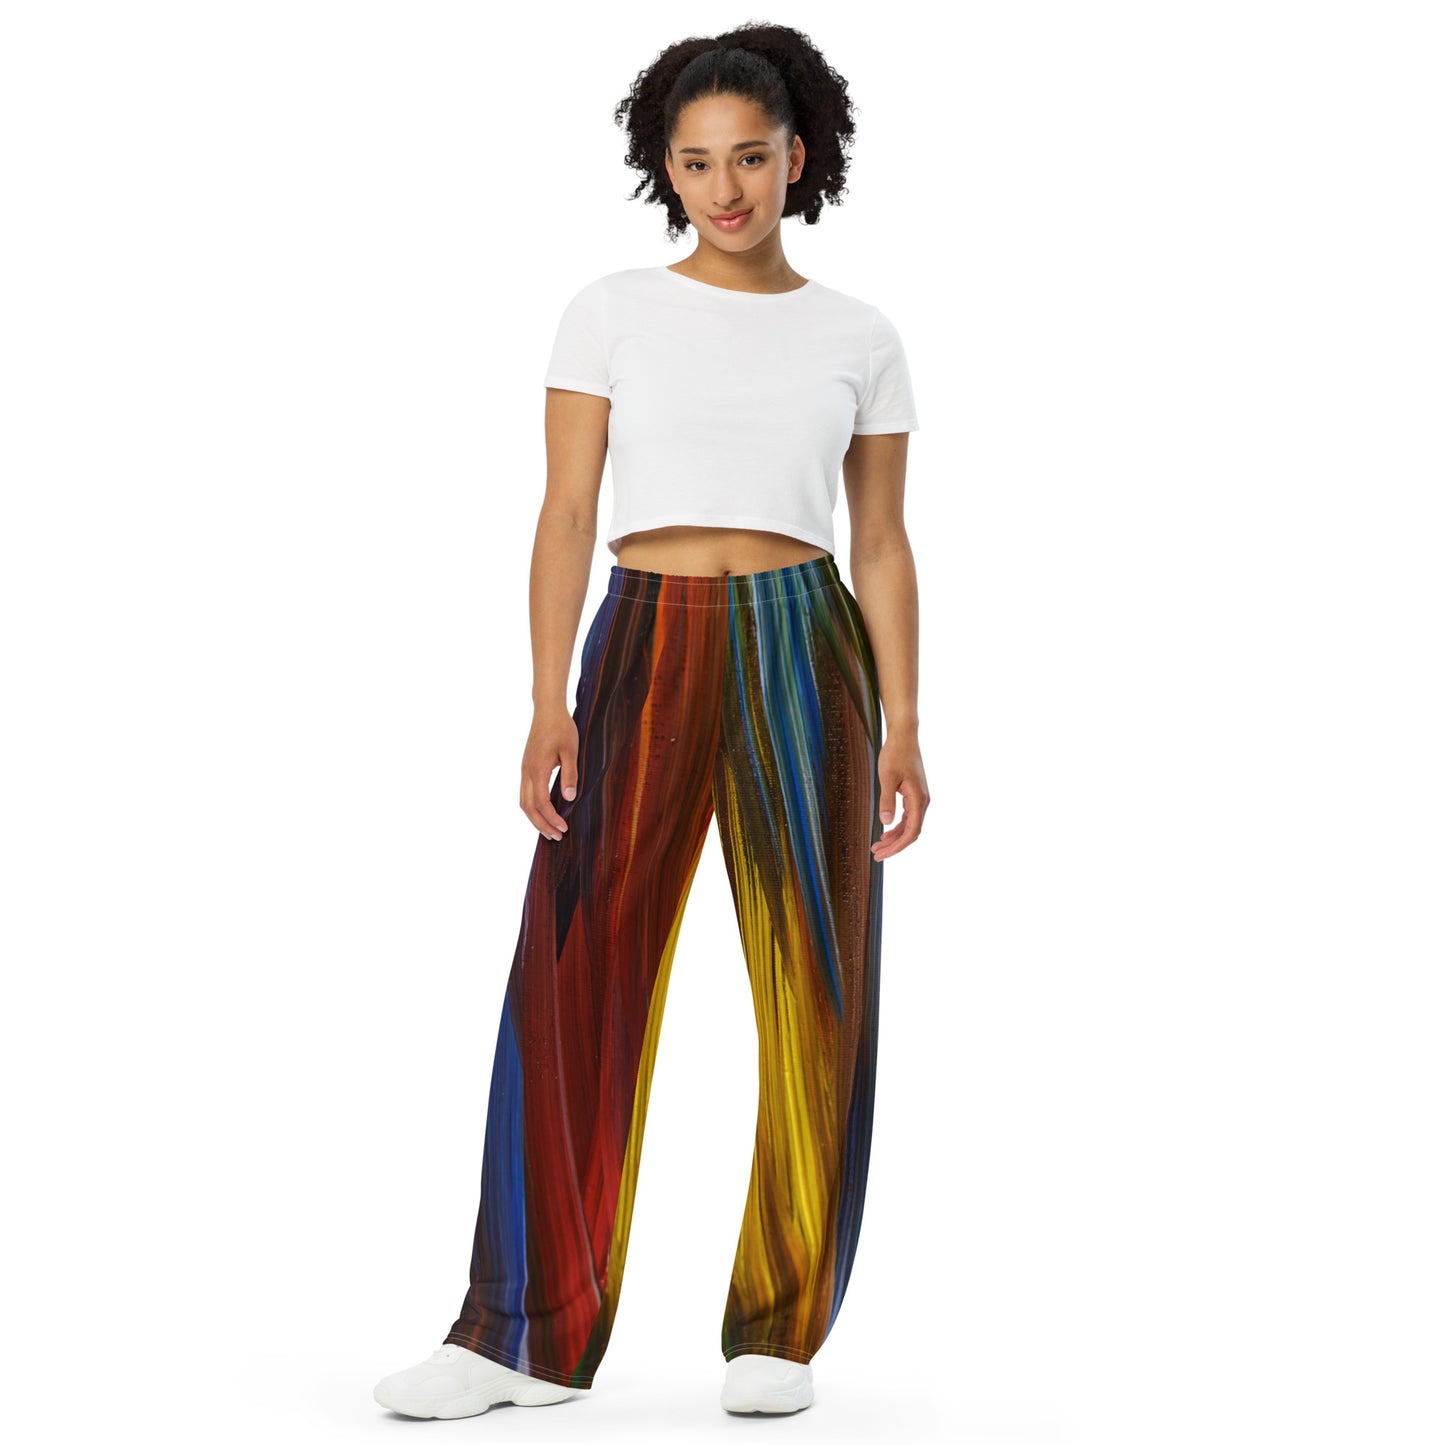 All-over print unisex wide-leg pants with hot colorful design (shipping to US, Canada & Europe)